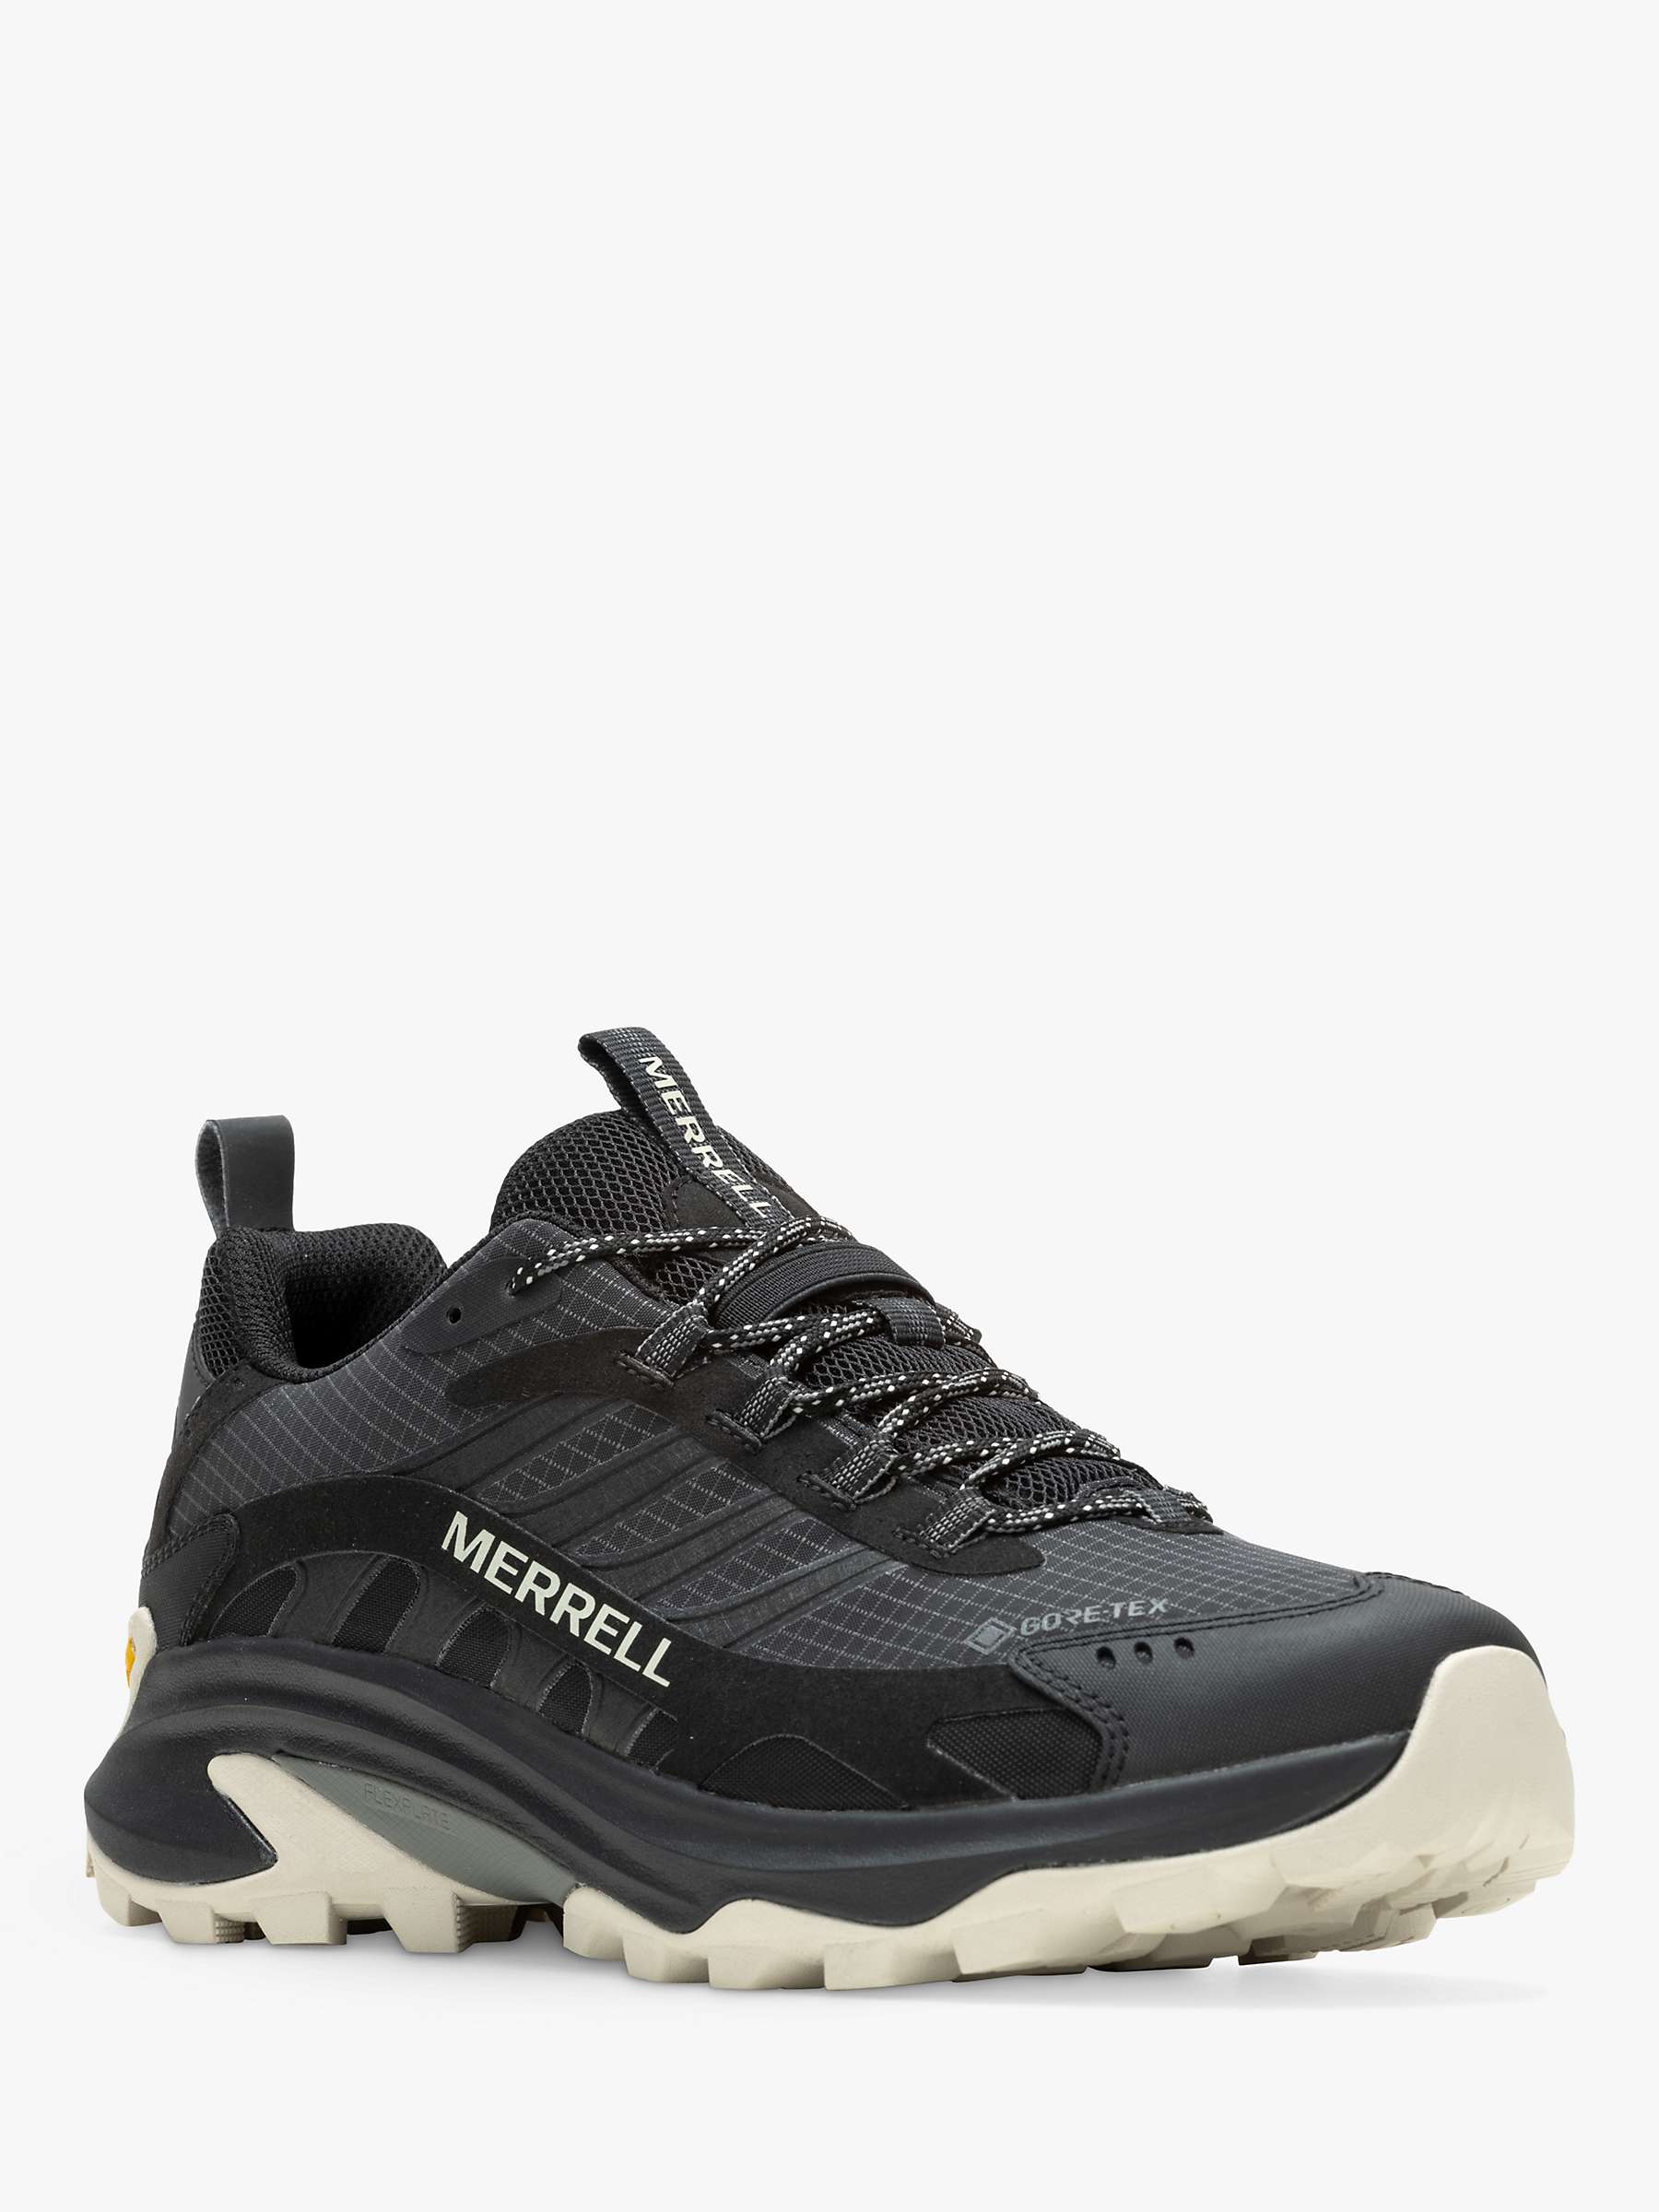 Buy Merrell Moab GORE-TEX Speed 2 Men's Sports Shoes, Black/Moon Online at johnlewis.com